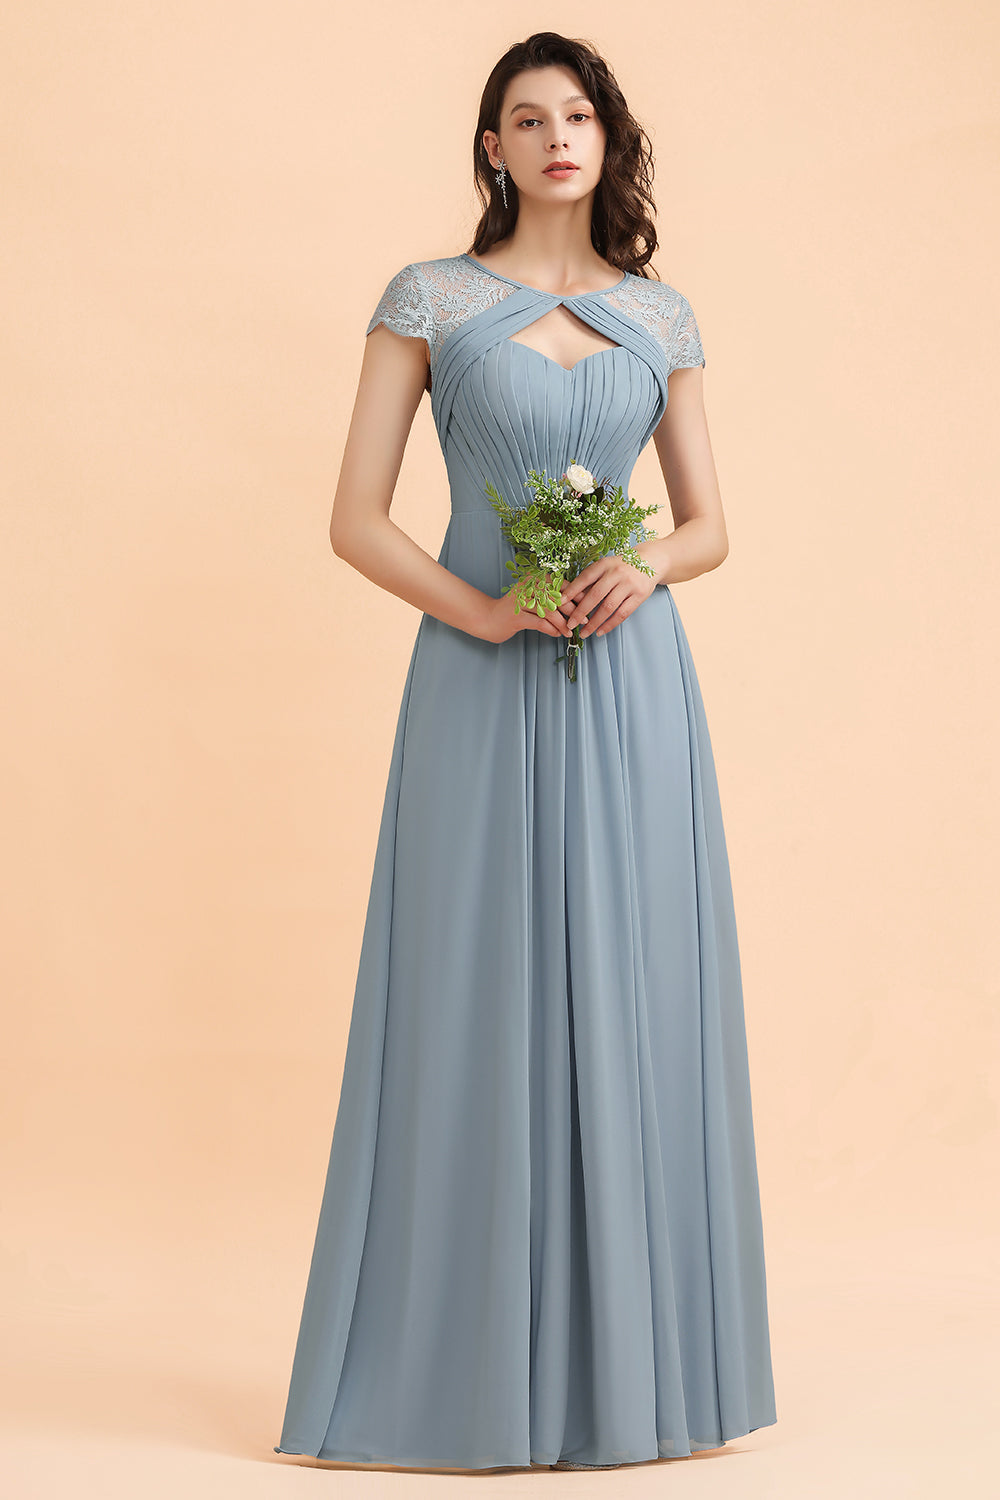 Load image into Gallery viewer, Chic Short Sleeves Lace Chiffon Bridesmaid Dress with Ruffles Online-27dress
